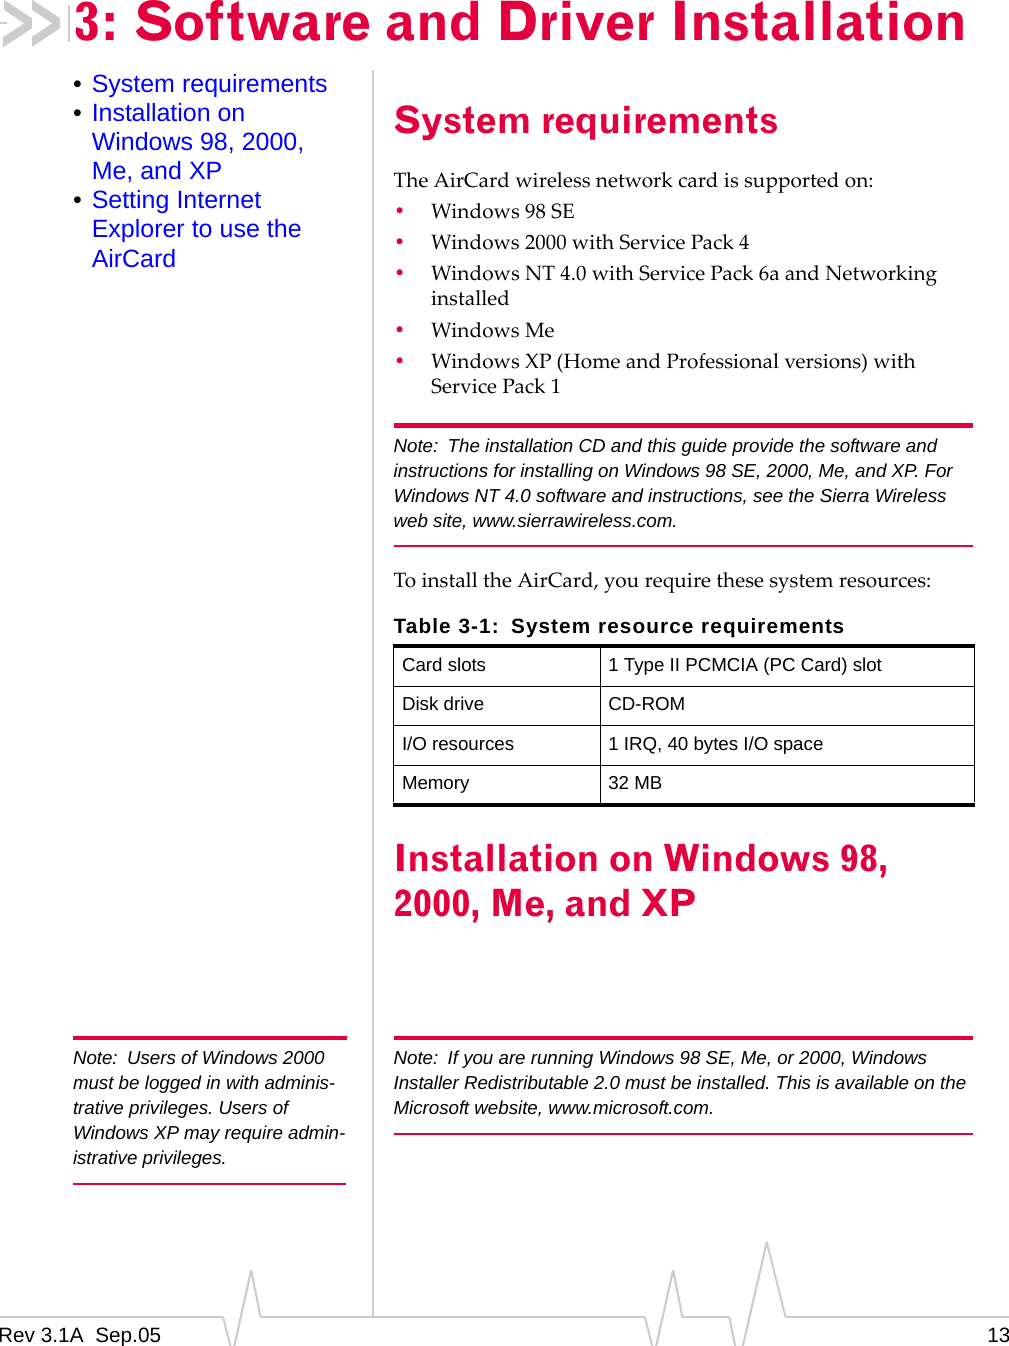 Rev 3.1A  Sep.05 133: Software and Driver Installation•System requirements•Installation on Windows 98, 2000, Me, and XP•Setting Internet Explorer to use the AirCardSystem requirementsThe AirCard wireless network card is supported on:•Windows 98 SE•Windows 2000 with Service Pack 4•Windows NT 4.0 with Service Pack 6a and Networking installed•Windows Me•Windows XP (Home and Professional versions) with Service Pack 1Note: The installation CD and this guide provide the software and instructions for installing on Windows 98 SE, 2000, Me, and XP. For Windows NT 4.0 software and instructions, see the Sierra Wireless web site, www.sierrawireless.com.To install the AirCard, you require these system resources:Installation on Windows 98, 2000, Me, and XPNote: Users of Windows 2000 must be logged in with adminis-trative privileges. Users of Windows XP may require admin-istrative privileges.Note: If you are running Windows 98 SE, Me, or 2000, Windows Installer Redistributable 2.0 must be installed. This is available on the Microsoft website, www.microsoft.com.Table 3-1: System resource requirementsCard slots 1 Type II PCMCIA (PC Card) slotDisk drive CD-ROMI/O resources 1 IRQ, 40 bytes I/O spaceMemory 32 MB